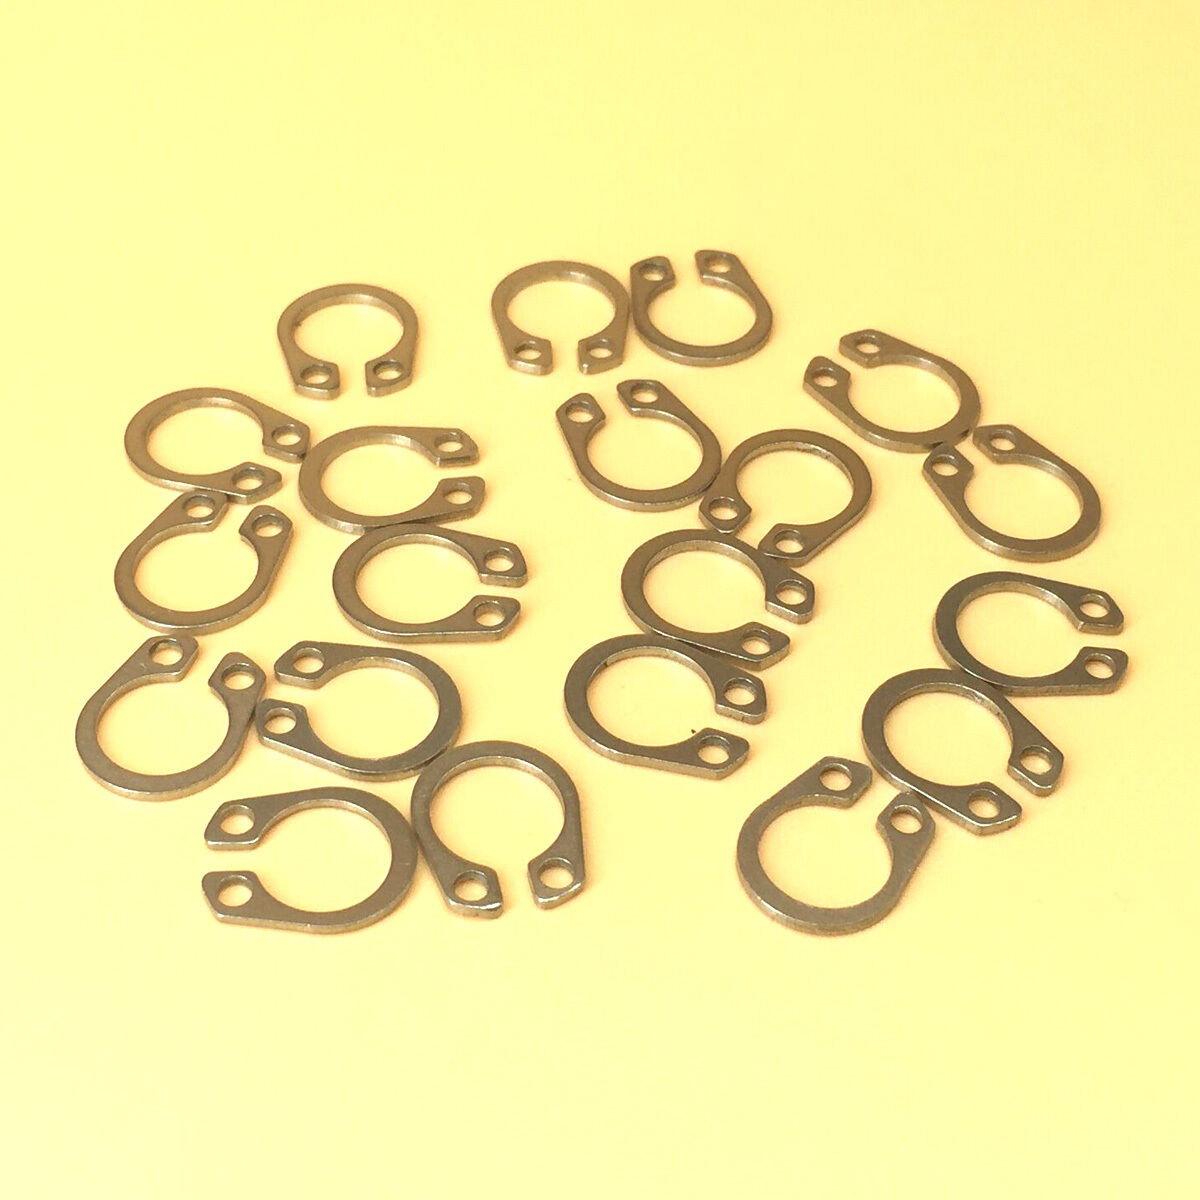 18 kinds of 304 Stainless Steel Circlip Retaining Ring Snap Ring Assortment Kit